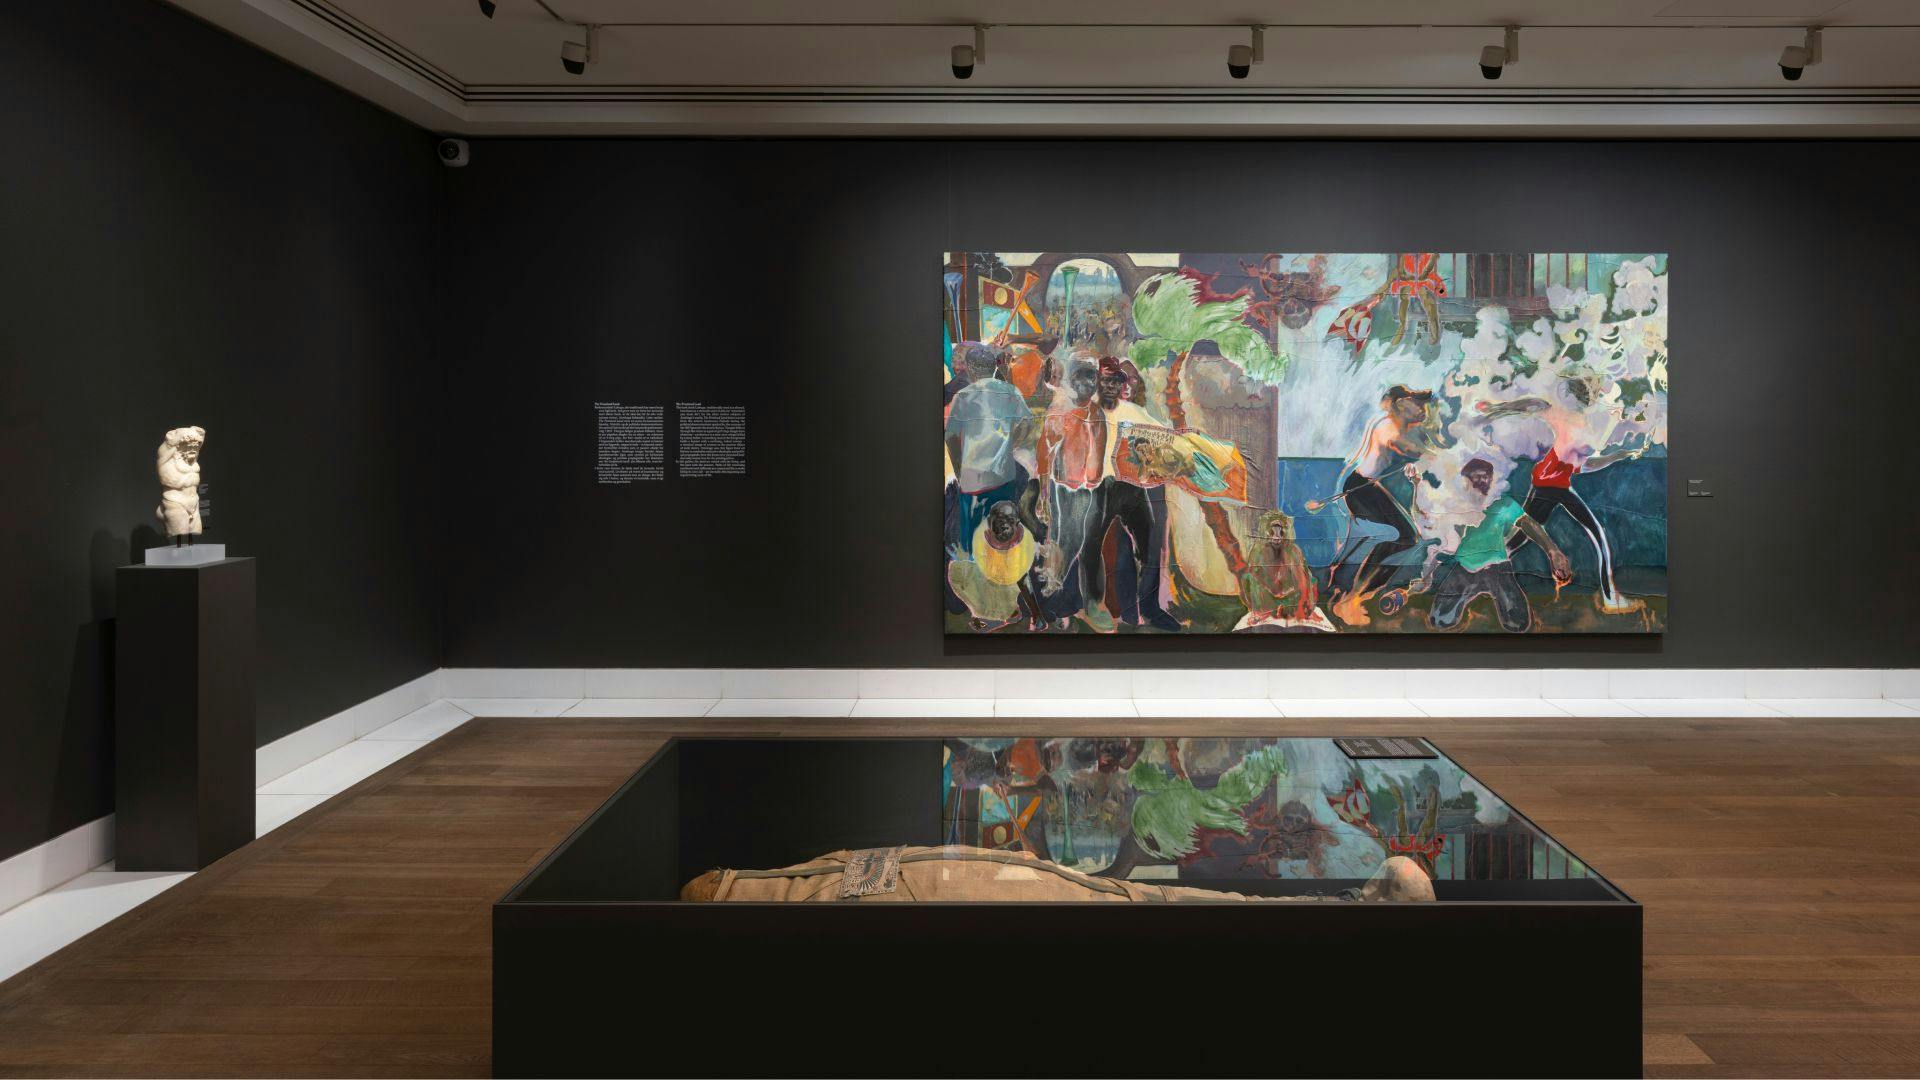 Installation view of the exhibition, Michael Armitage – Account of an Illiterate Man, at Ny Carlsberg Glyptotek in Copenhagen, dated 2021.